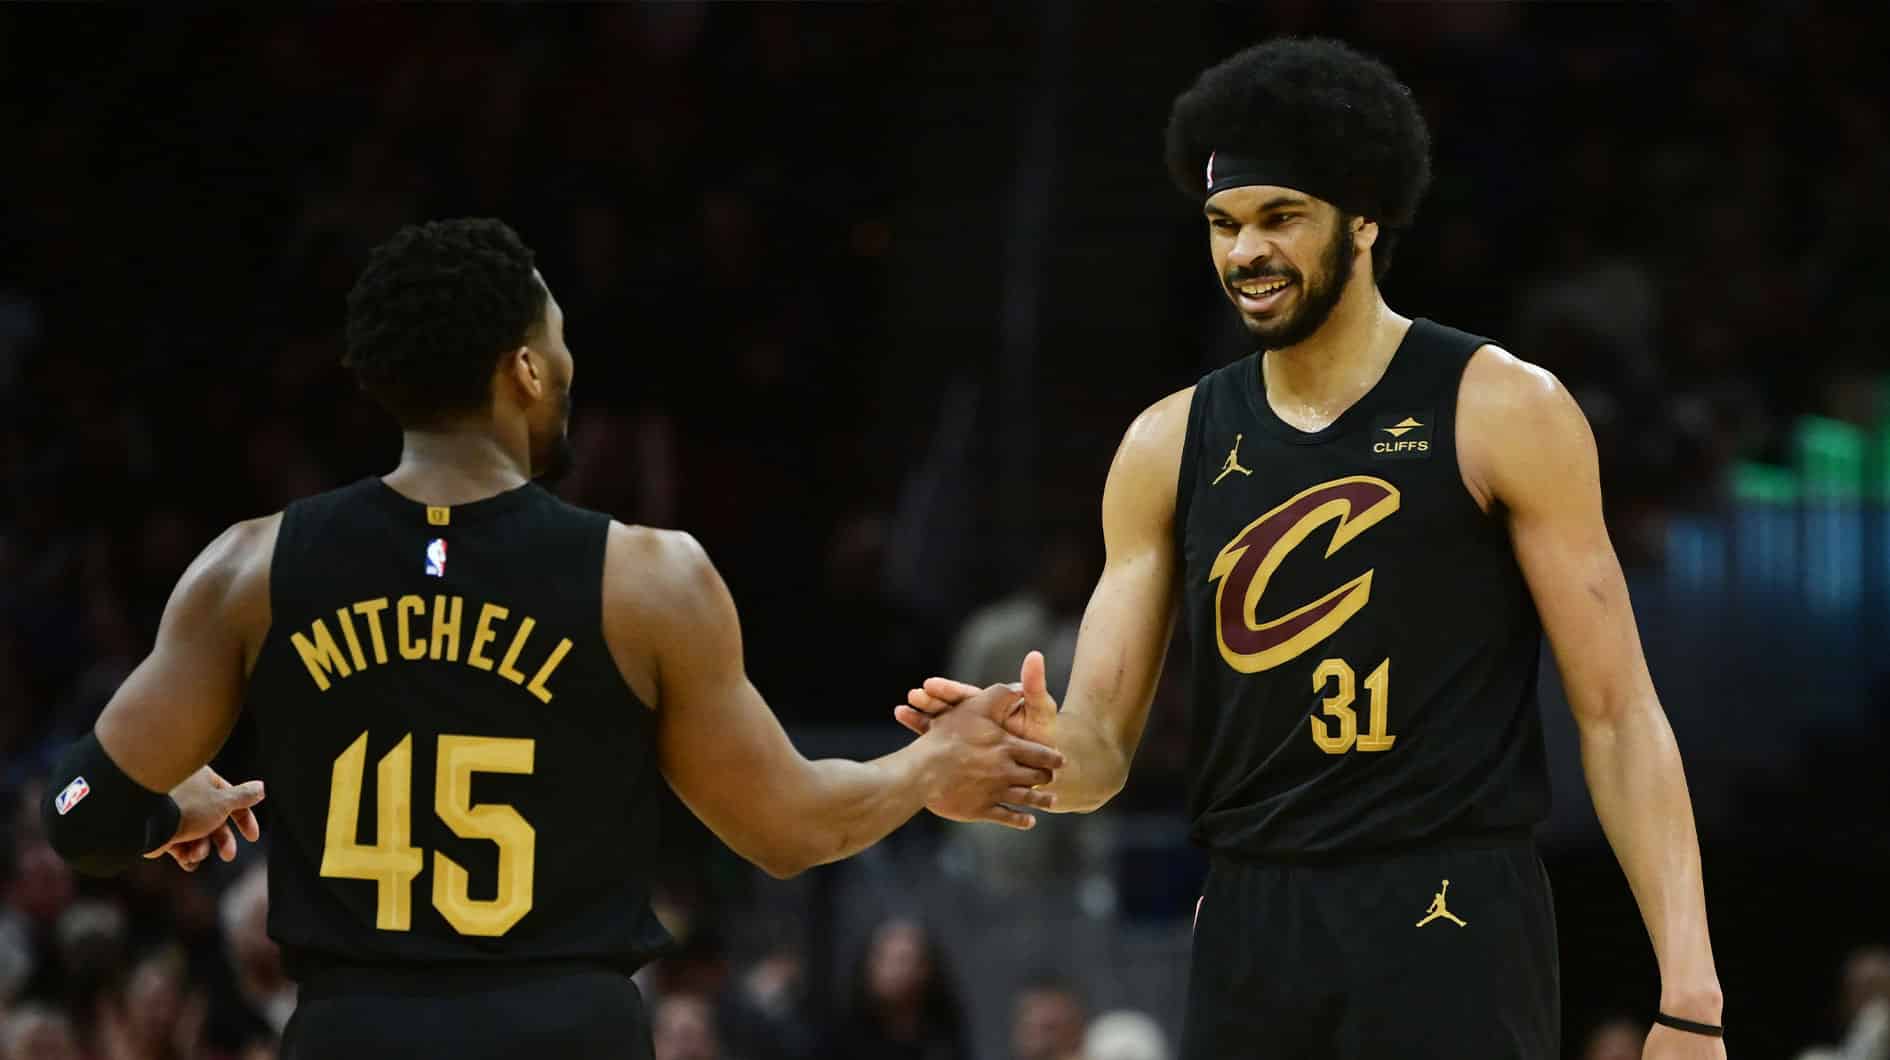 Cleveland Cavaliers guard Donovan Mitchell (45) and center Jarrett Allen (31) celebrate during the second half against the Memphis Grizzlies at Rocket Mortgage FieldHouse